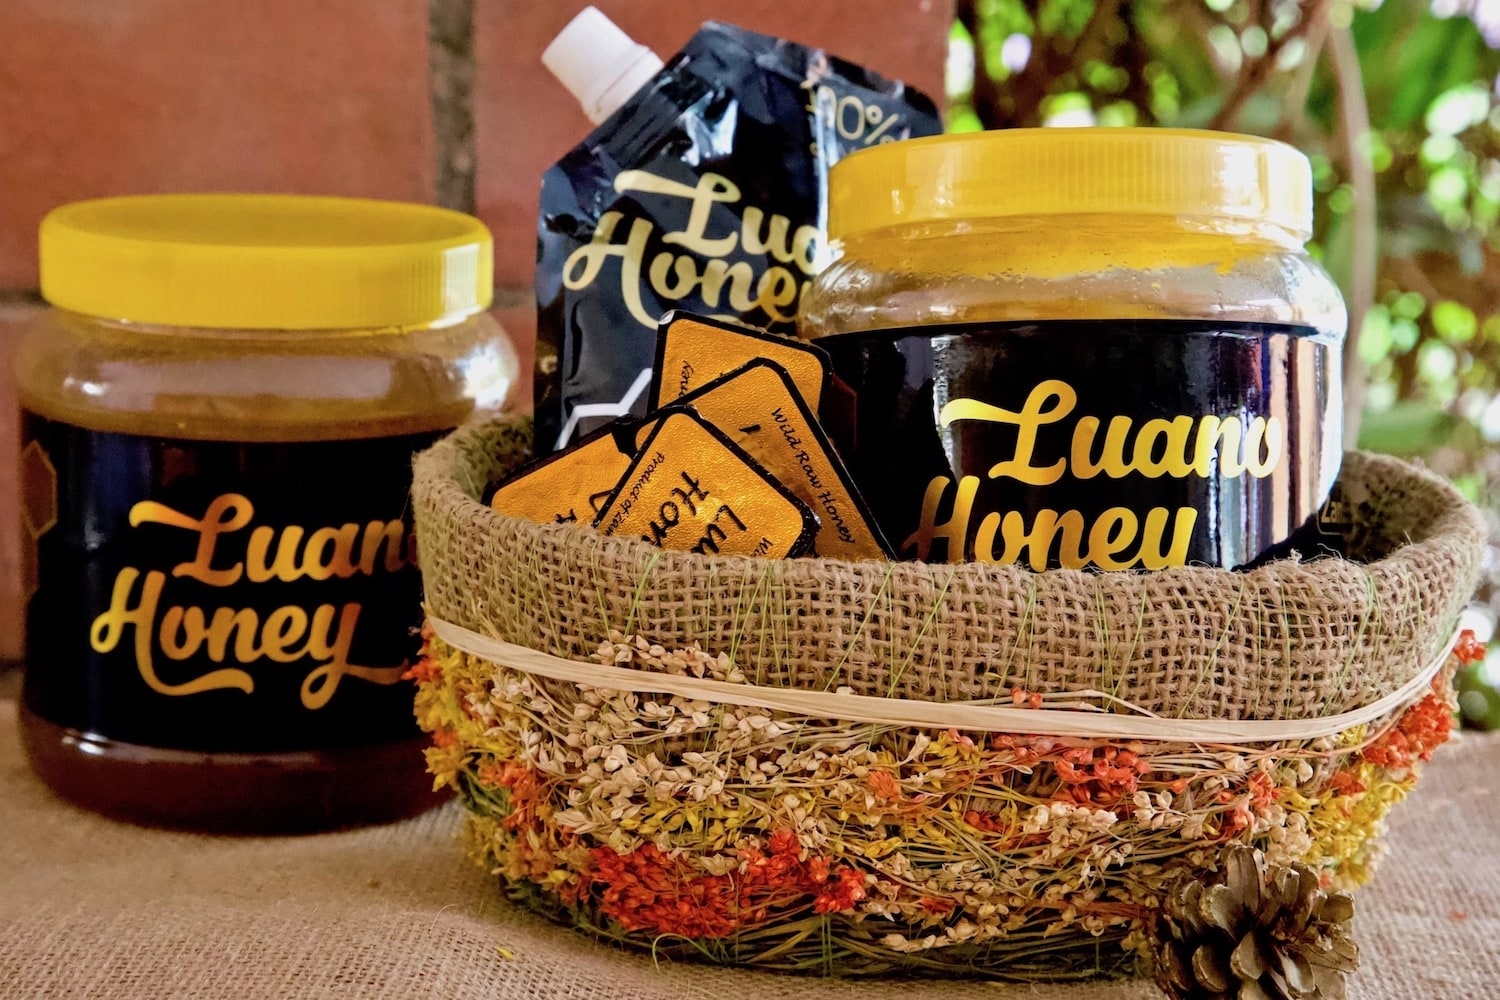 Luano Honey Jar, Pouch and Mini Cup